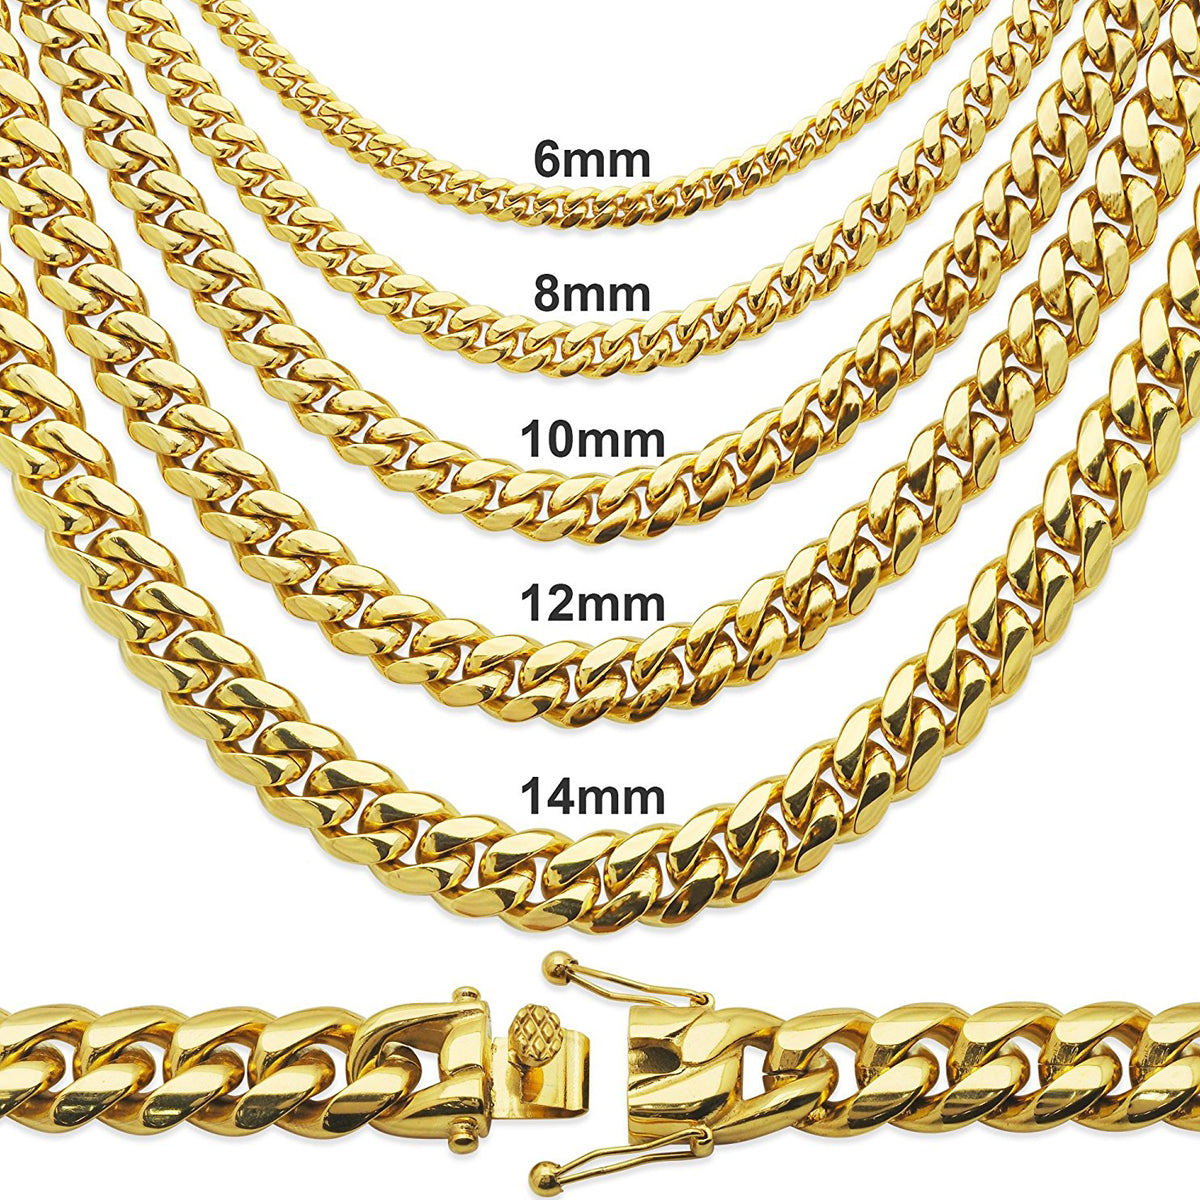 26" Stainless Steel 6mm Miami Cuban Necklace